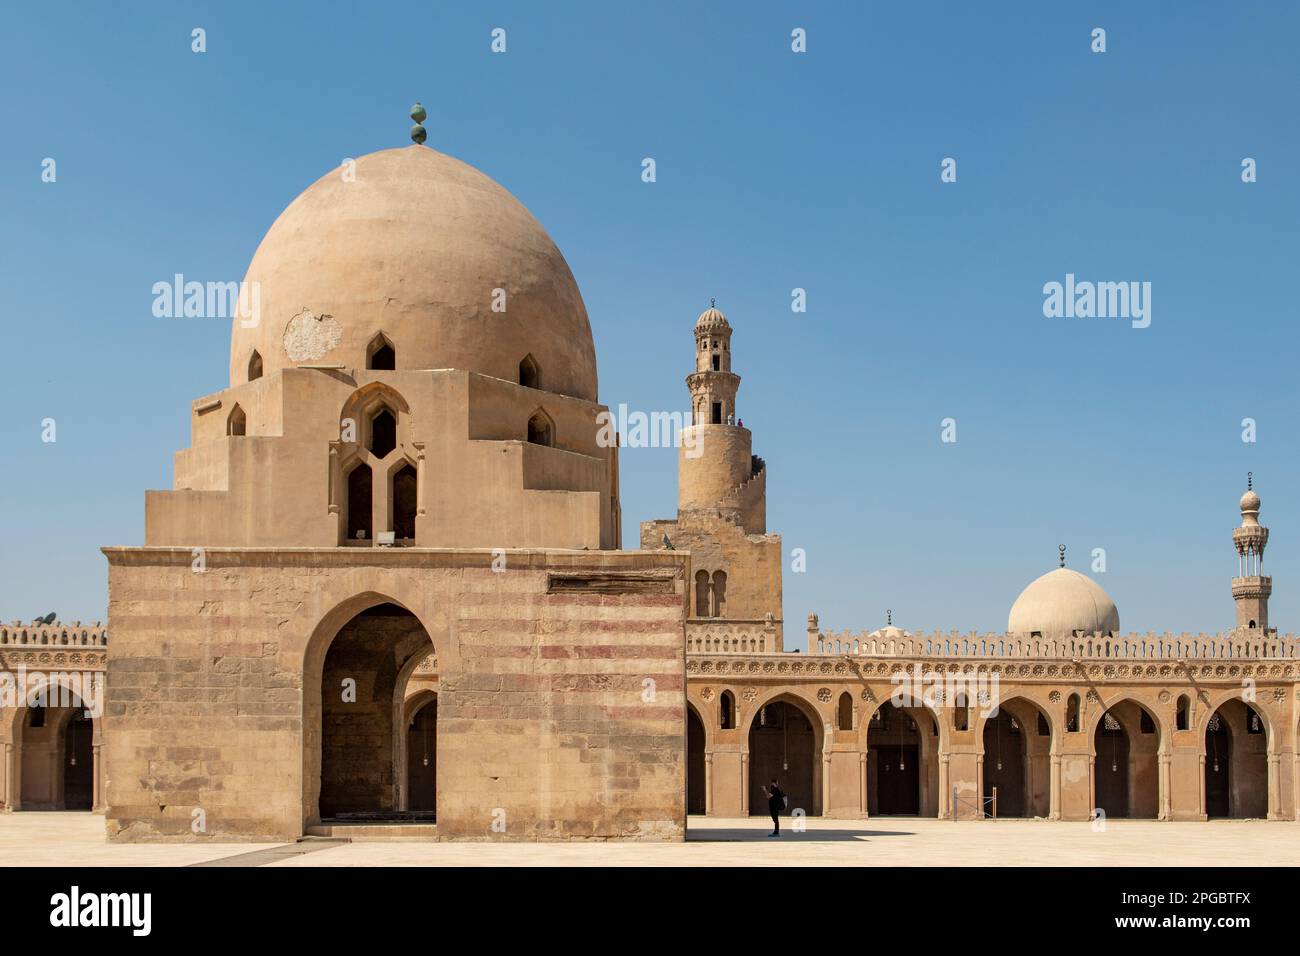 Fountain in Mosque of Ahmed Ibn Tulun, Cairo, Egypt Stock Photo